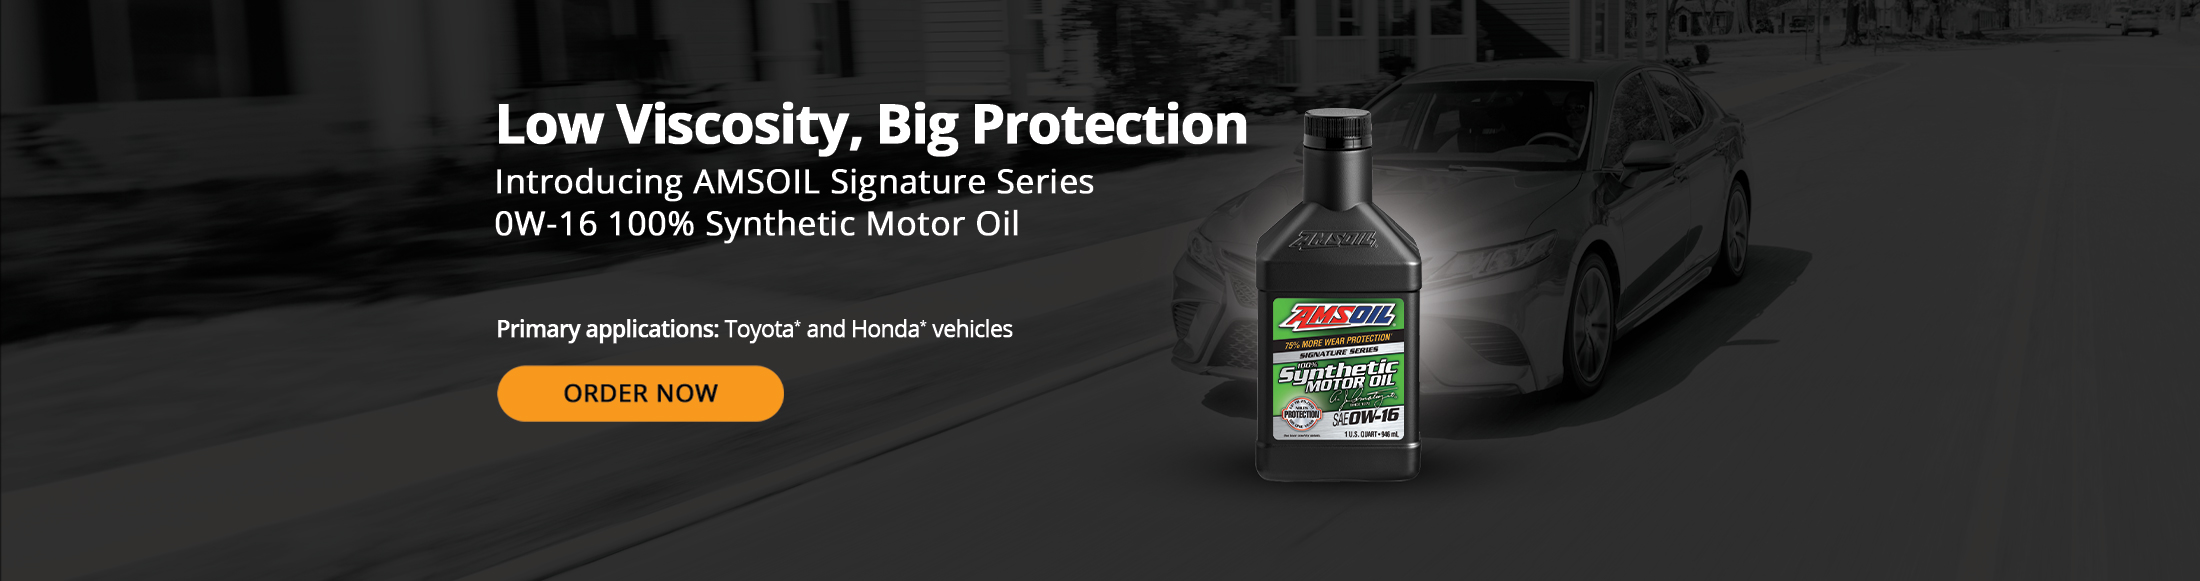 Low viscosity, big protection. Introducing AMSOIL Signature Series 0W-16 100% Synthetic Motor Oil. Primary Applications: Toyota* and Honda* vehicles. Order Now.